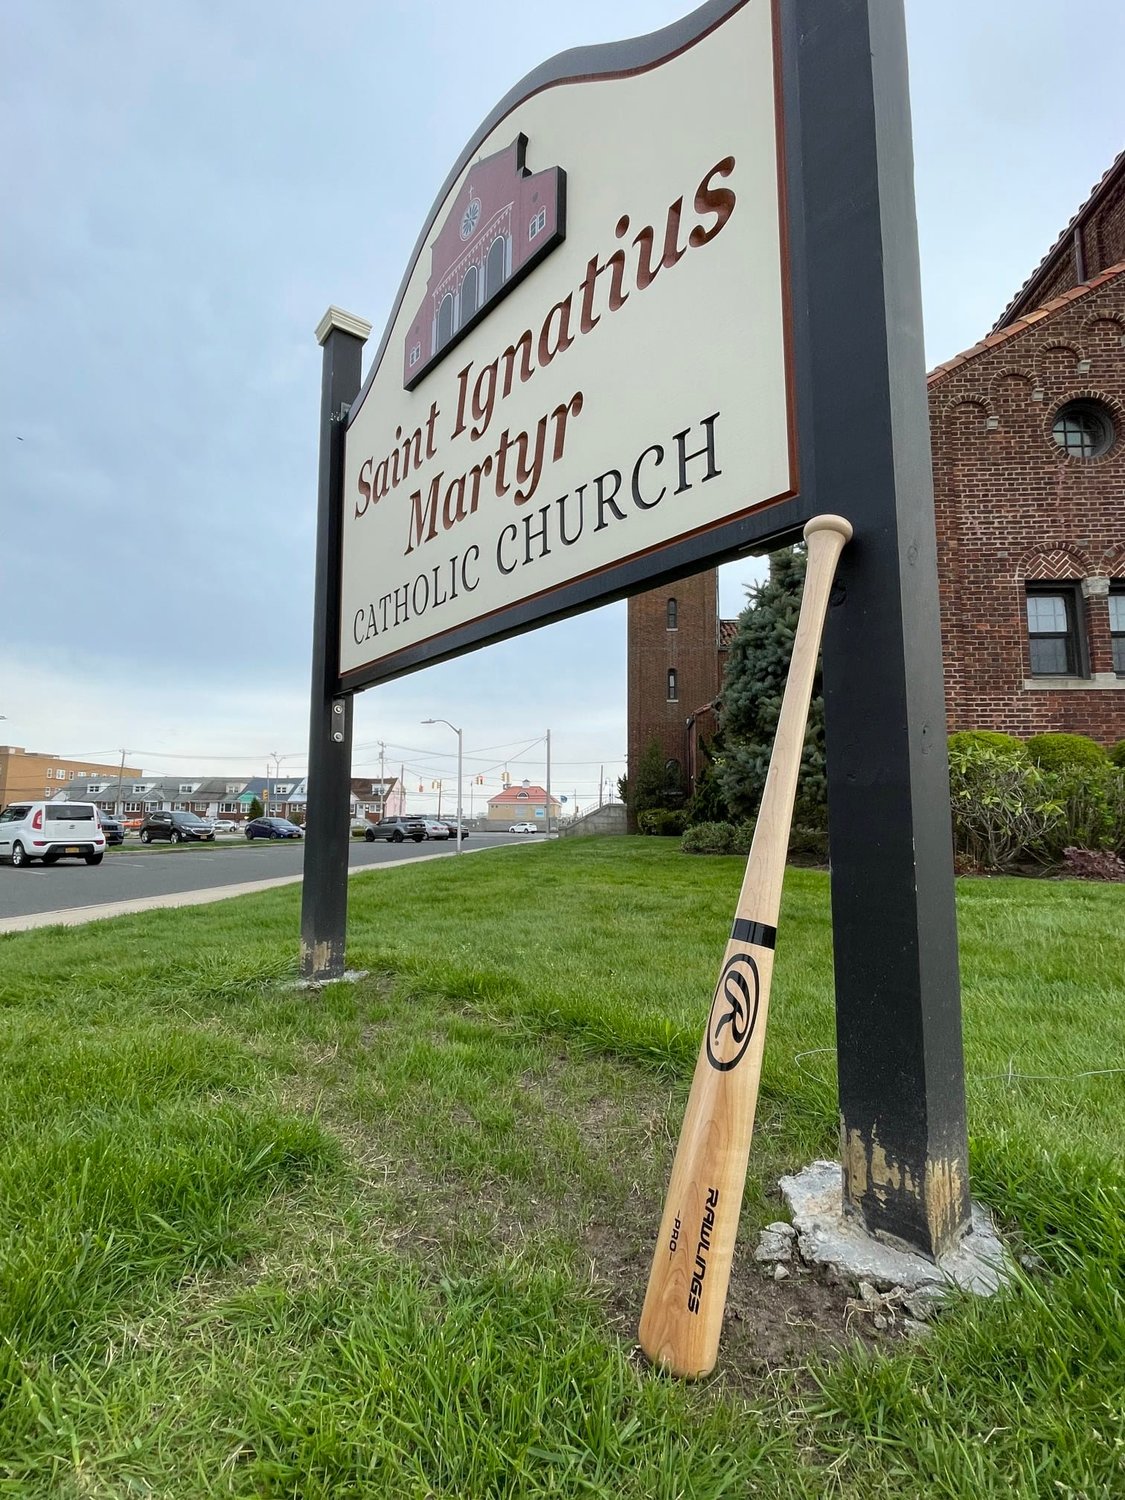 A baseball bat outside St. Ignatius Martyr Church honored 10-year-old Lazar LaPenna, who collapsed and died during a Little League game.